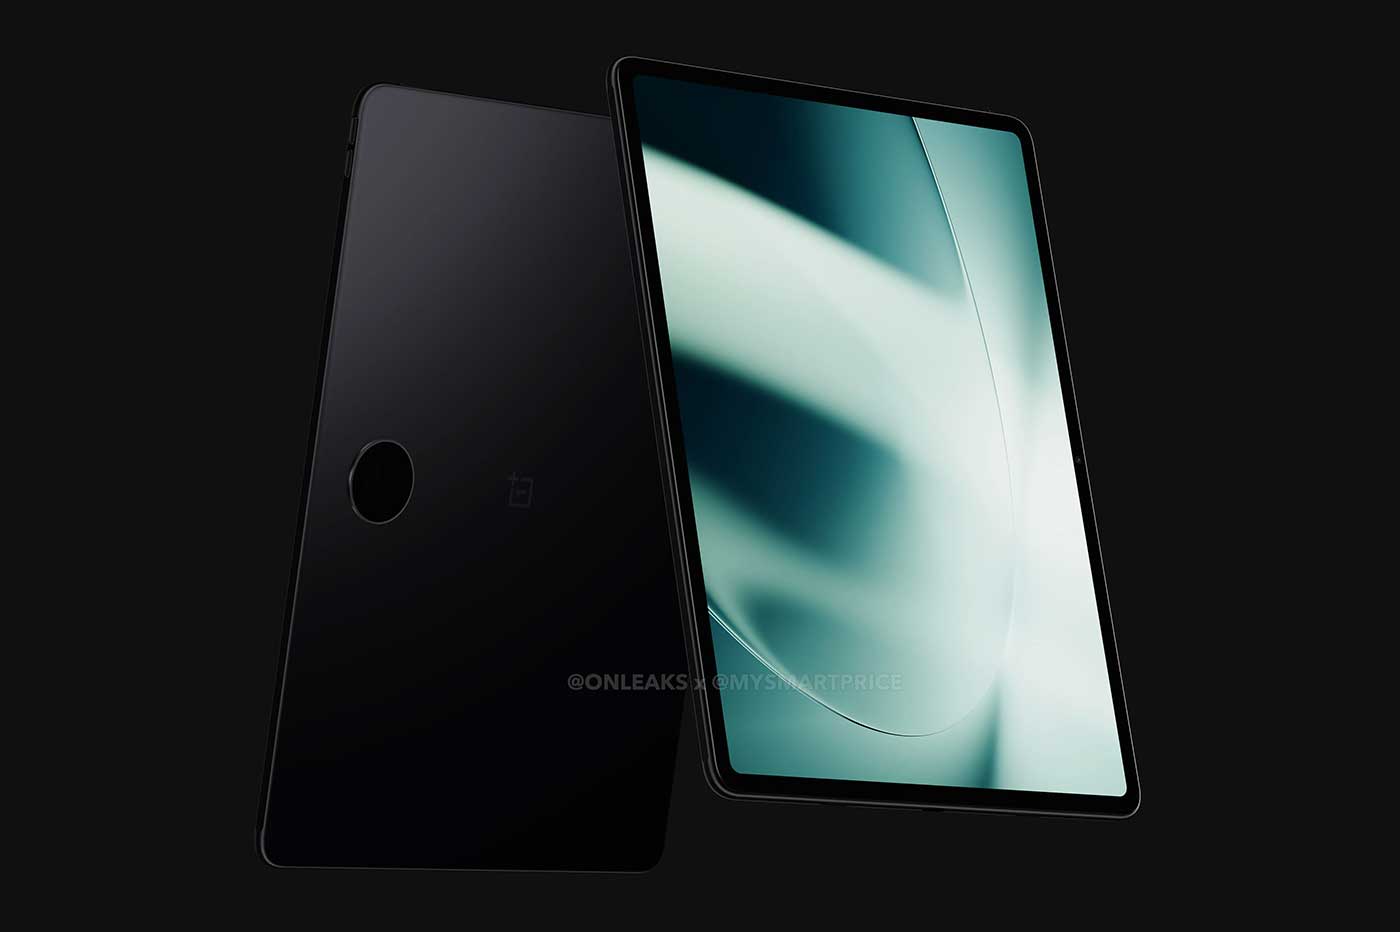 an intriguing design for this first tablet